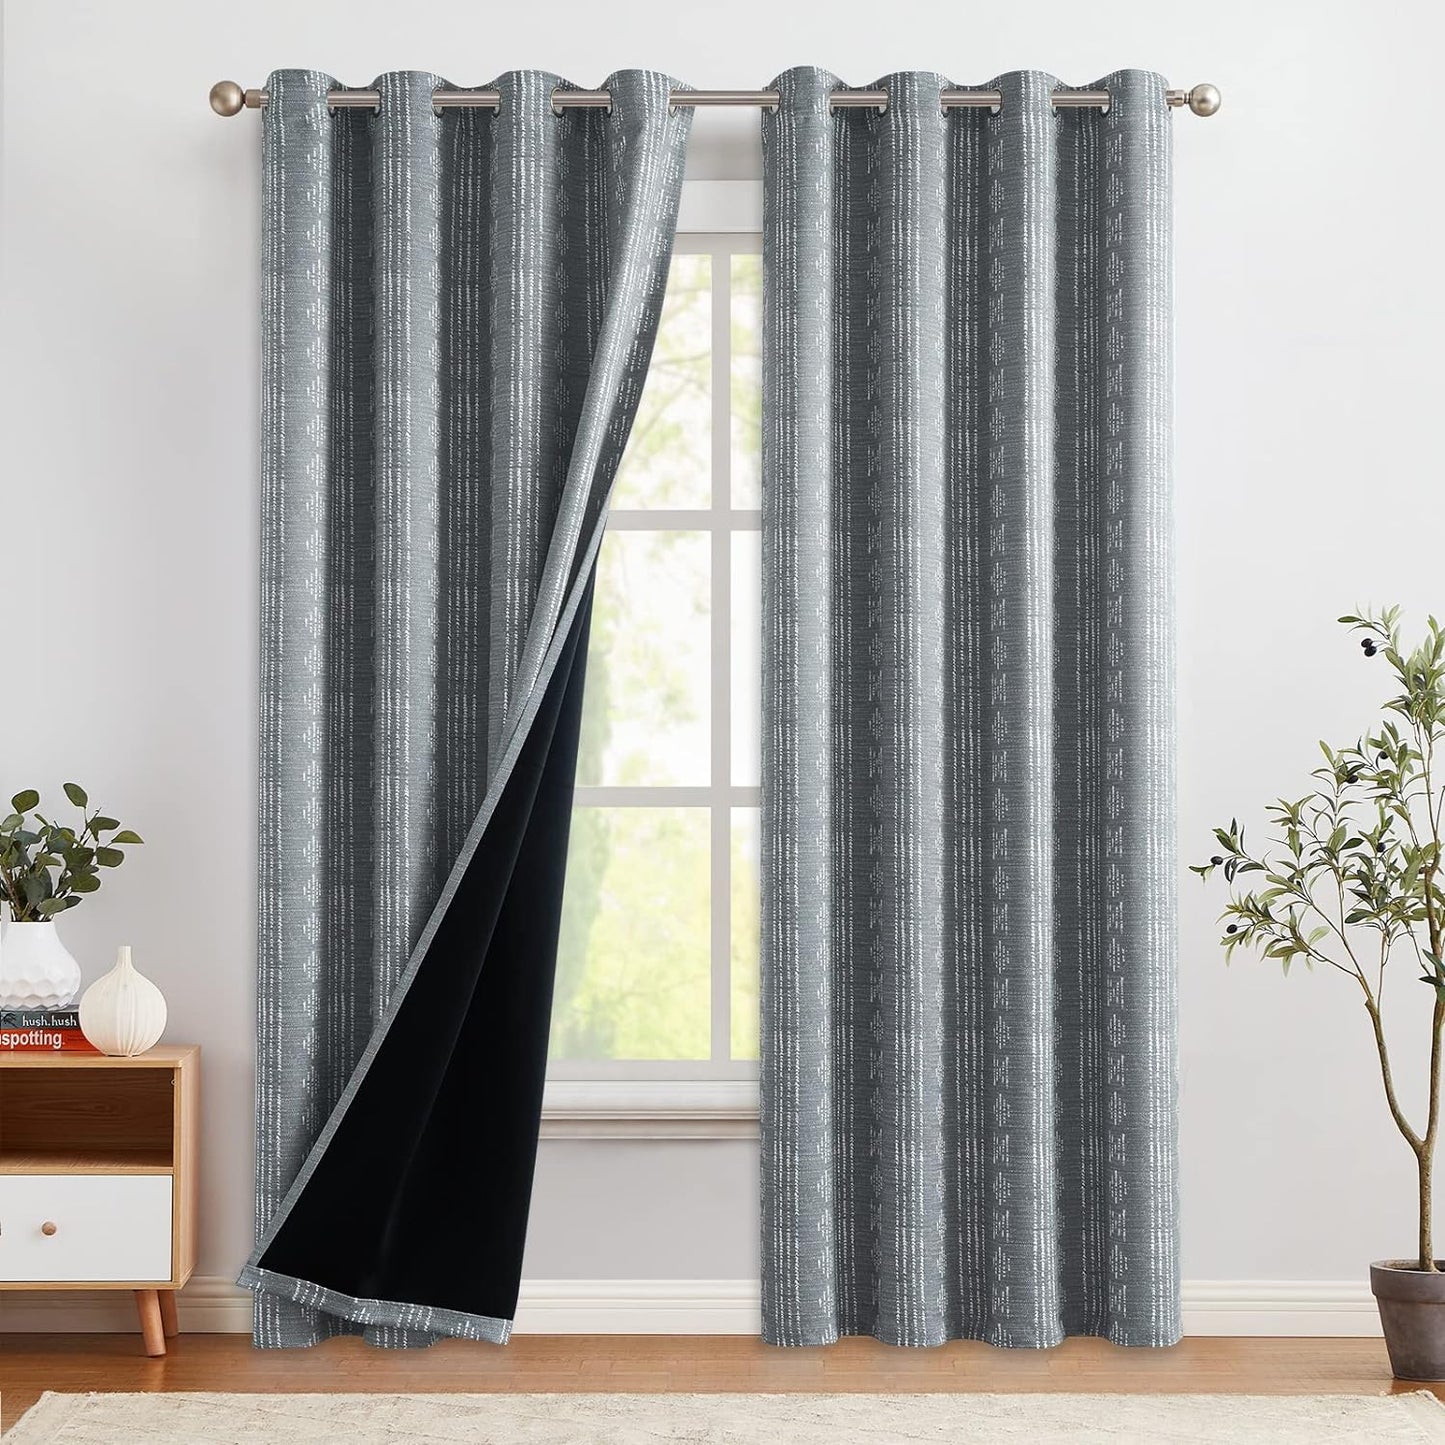 COLLACT 100% Boho Blackout Curtains for Bedroom 84 Inch Length Black on Beige Geometric Stripe Pattern Curtains for Living Room Thermal Insulated Room Darkening Drapes Grommet Window Curtains 2 Panels  COLLACT A2 | Grey W52 X L84 